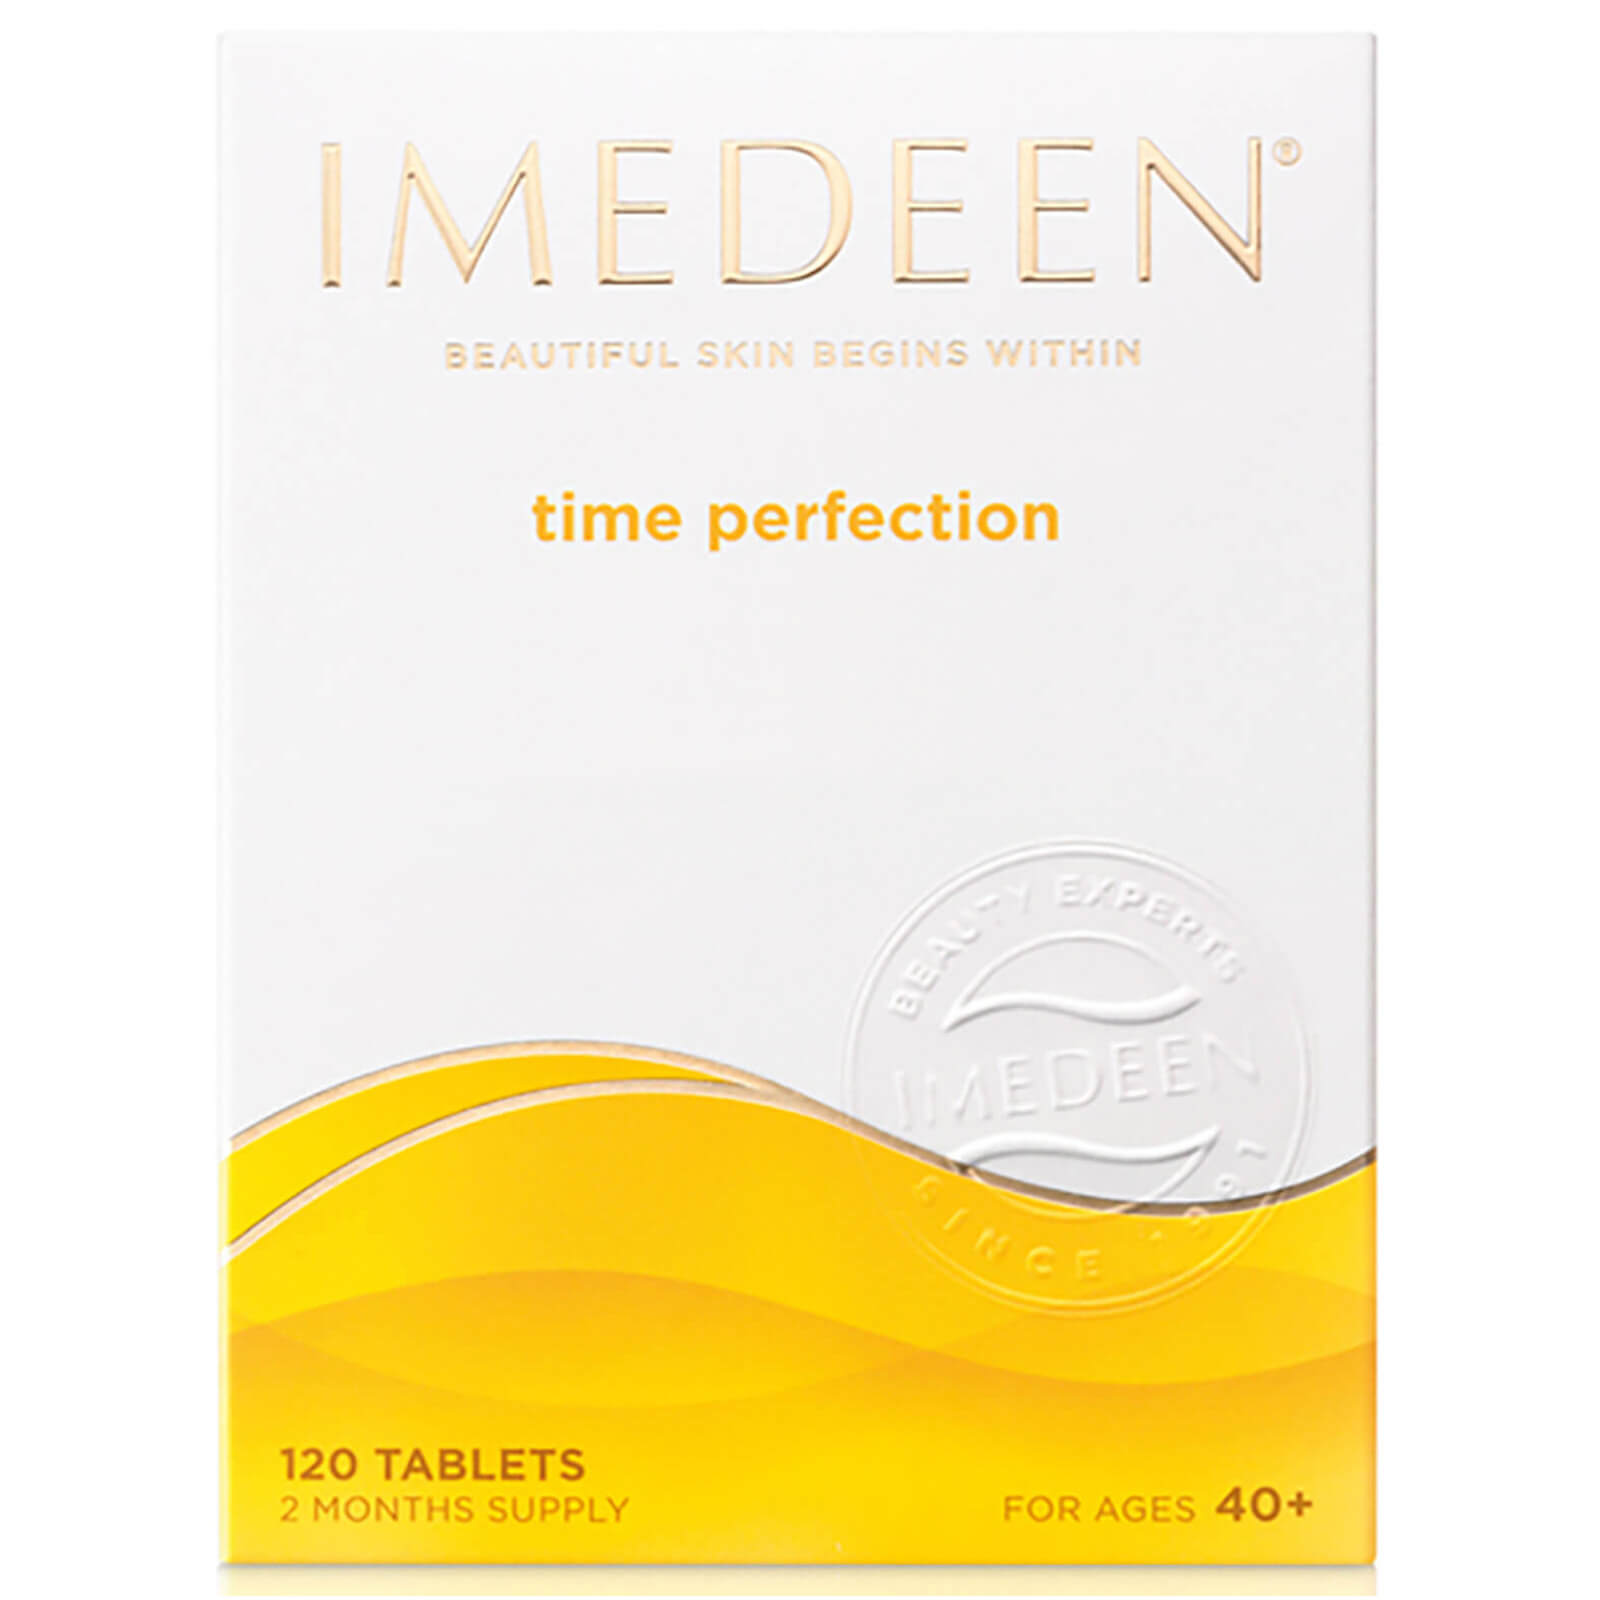 Imedeen Time Perfection (120 Tablets) (Age 40+) lookfantastic.com imagine